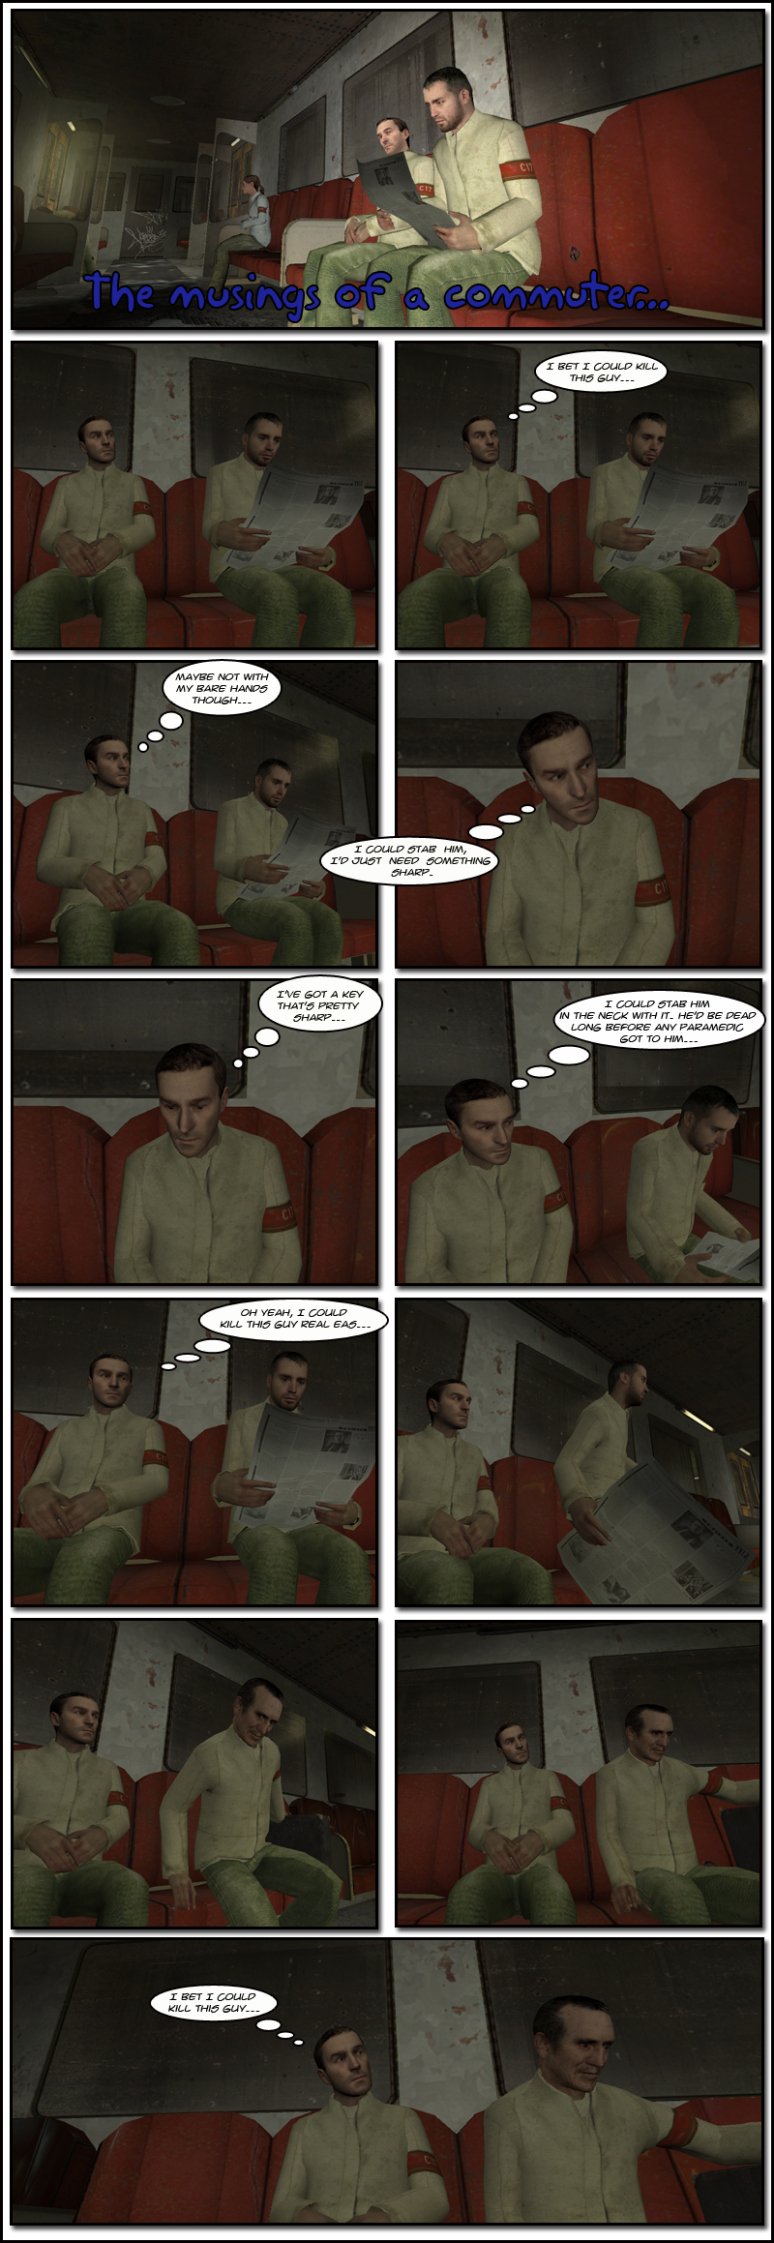 AJ Rimmer is inside a train staring at another passenger sitting next to him who is reading a newspaper. Rimmer thinks to himself he bet he could kill this guy, maybe not with his bare hands though, he could stab him with something sharp. He reasons he has a key and that's pretty sharp, then considers he could stab the man in the neck and he would be dead long before any paramedic got to him. As Rimmer thinks he could kill this guy really easy, the man stands up and leaves. Another passenger sits down next to Rimmer, who stares at him for a moment, then thinks to himself he bet he could kill this guy. The end.